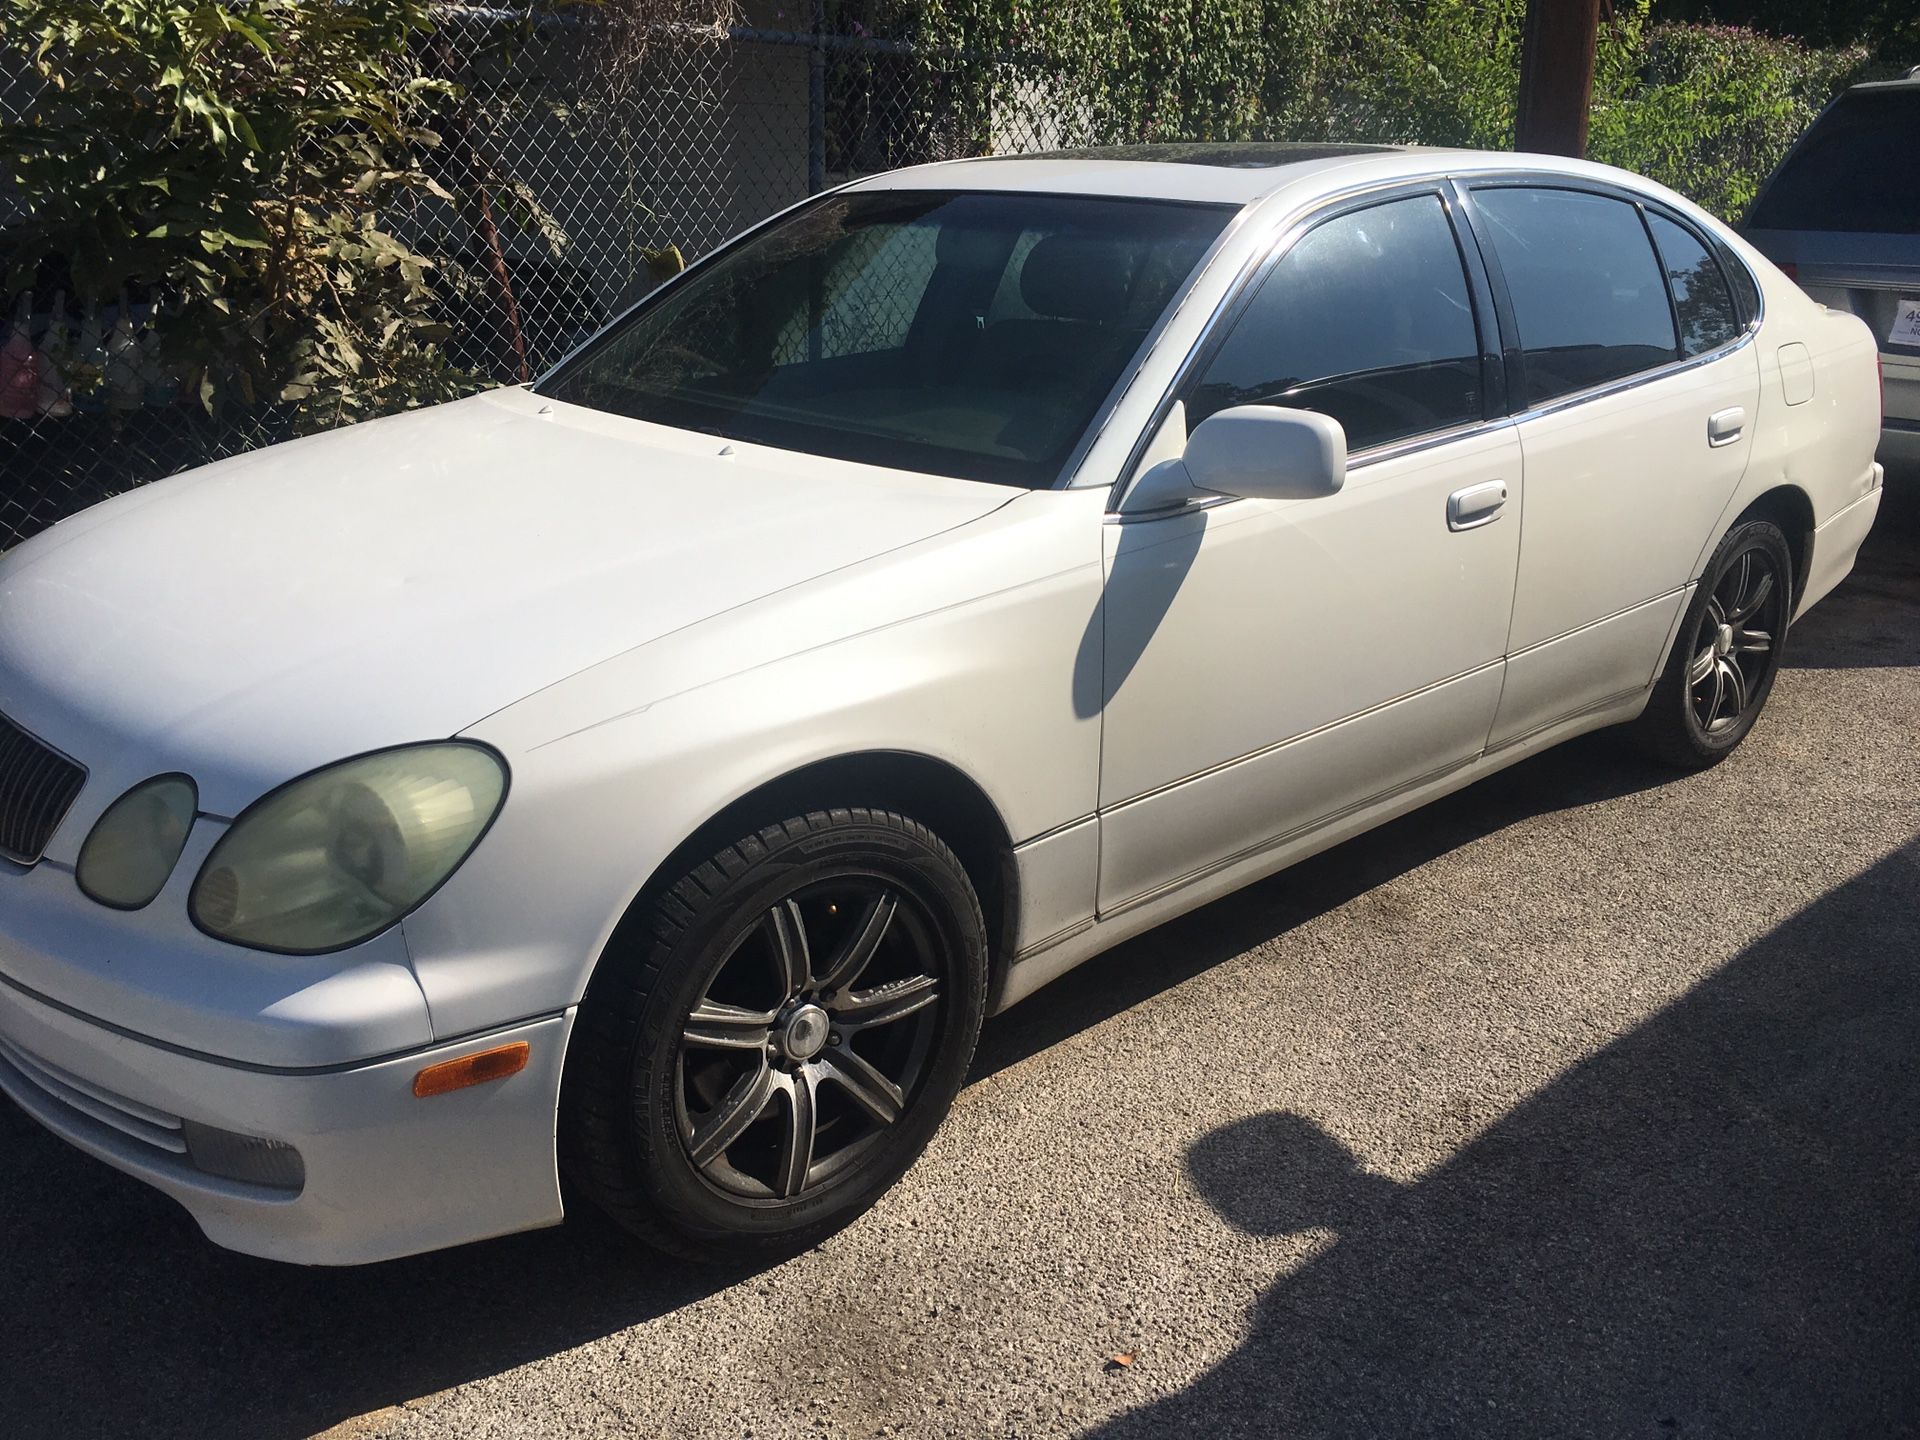 2003 Lexus gs300 3450 1500 down no credit check no drivers license needed